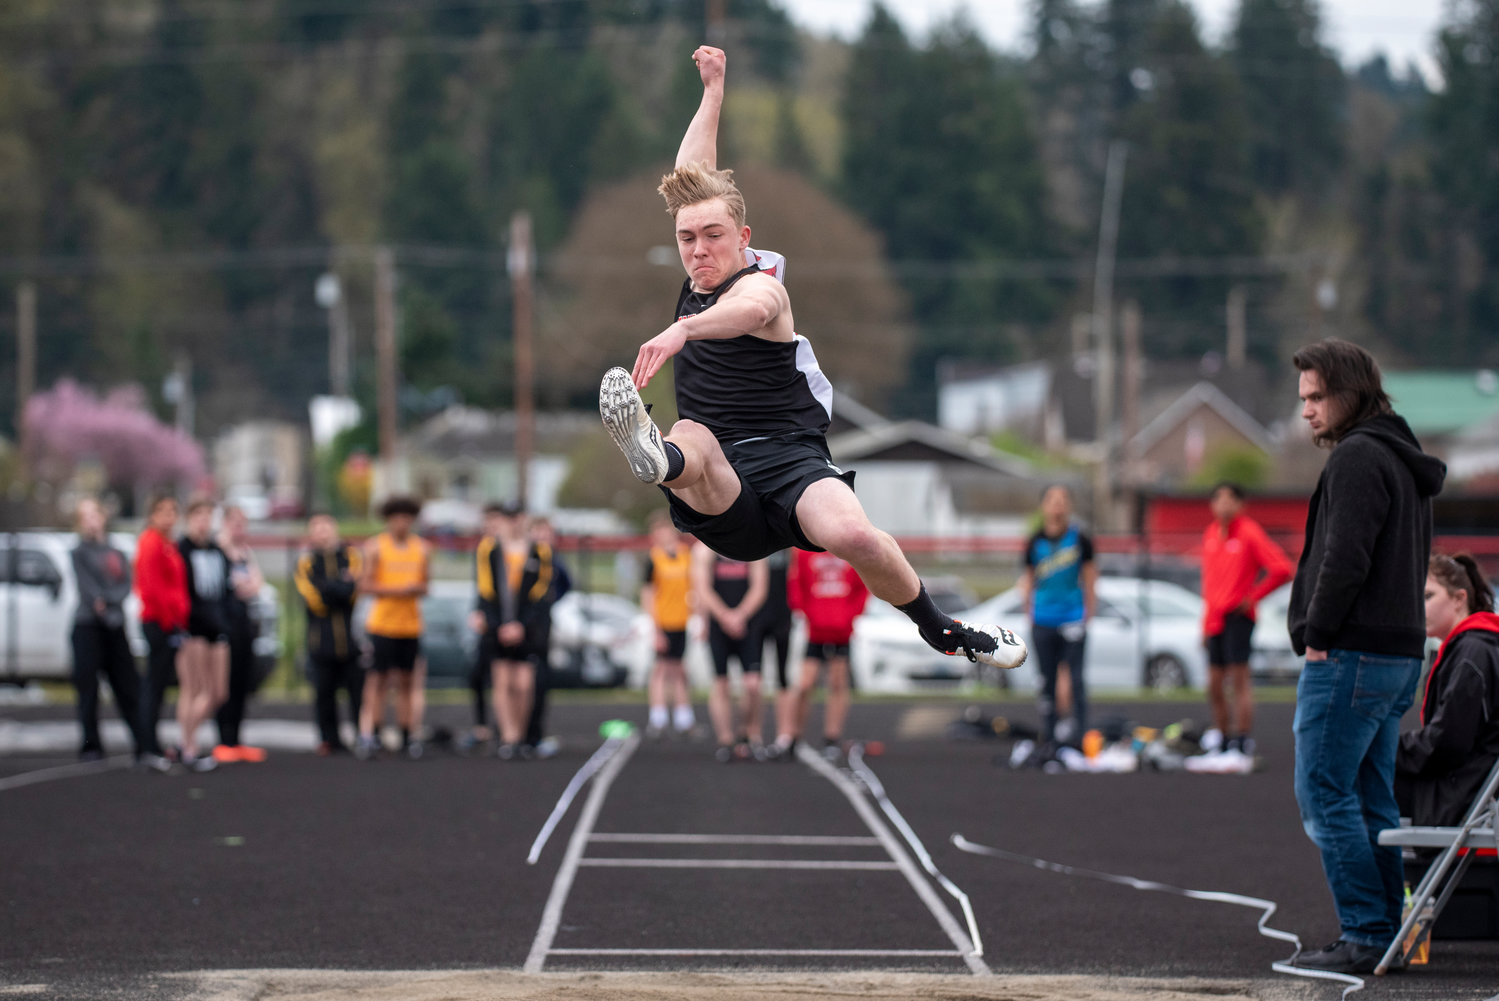 Tenino's Gavin Watson catches air in the boys long jump during a home meet on March 29.